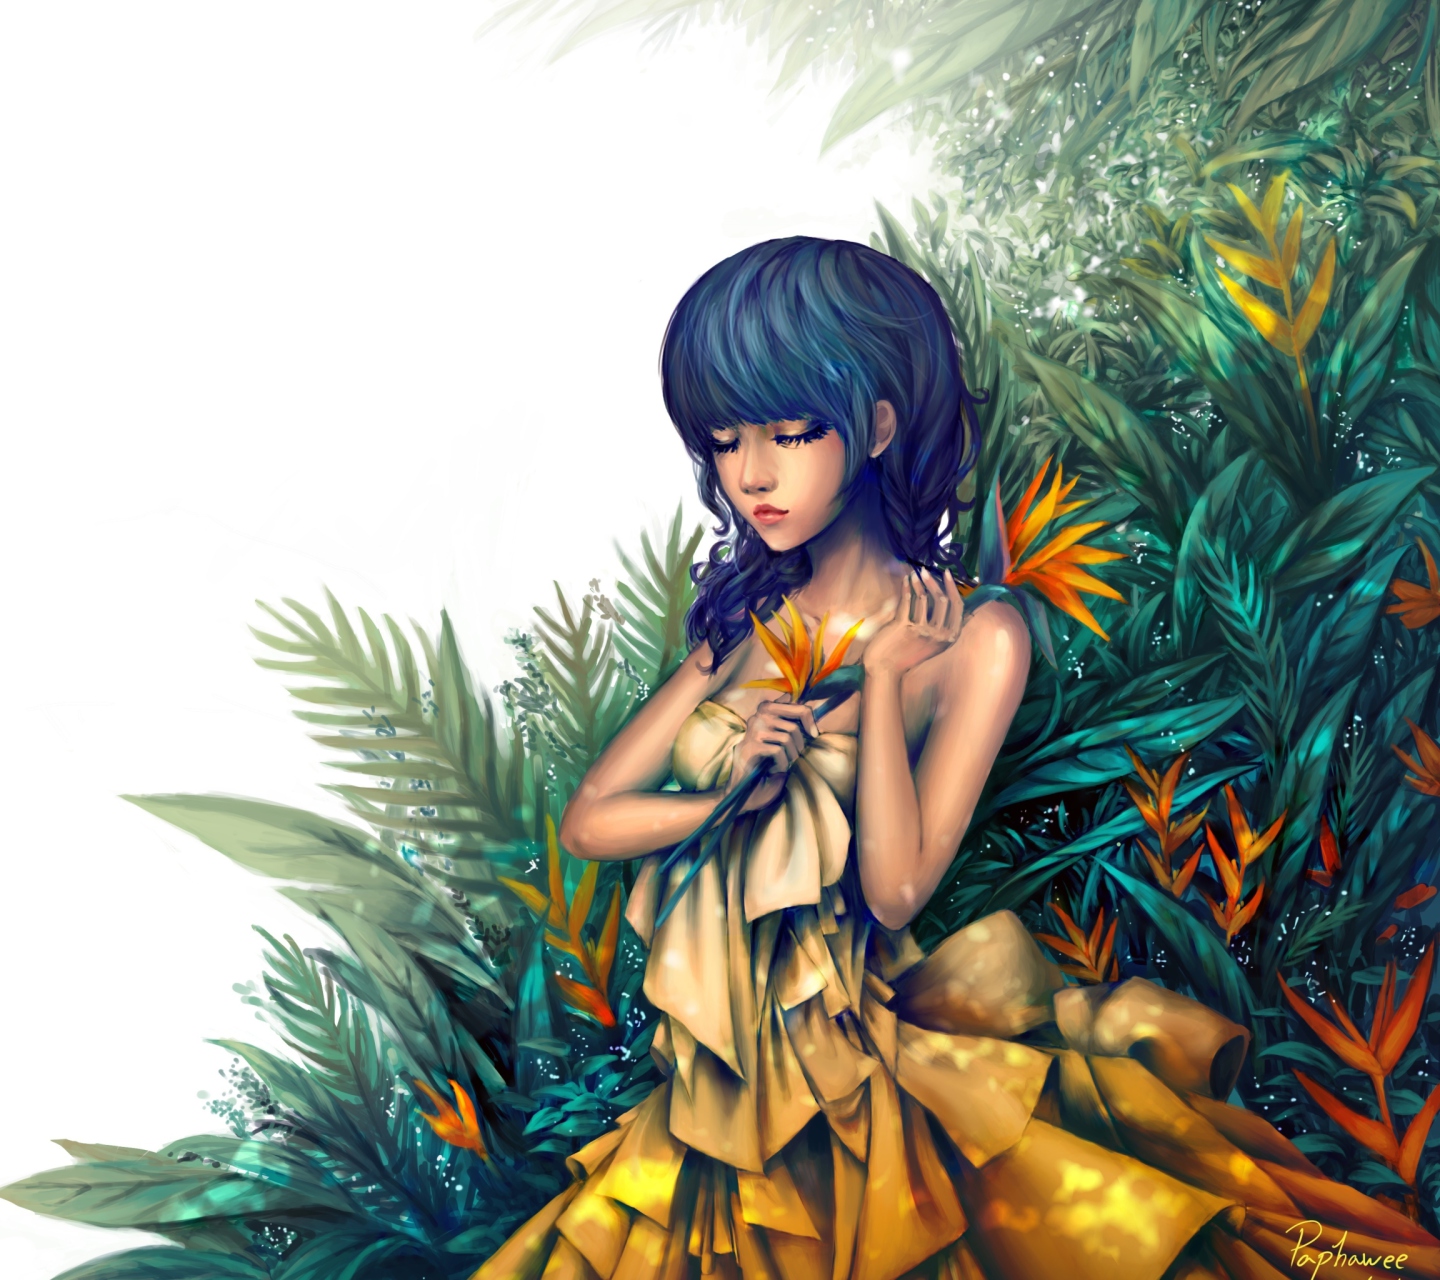 Girl In Yellow Dress Painting wallpaper 1440x1280